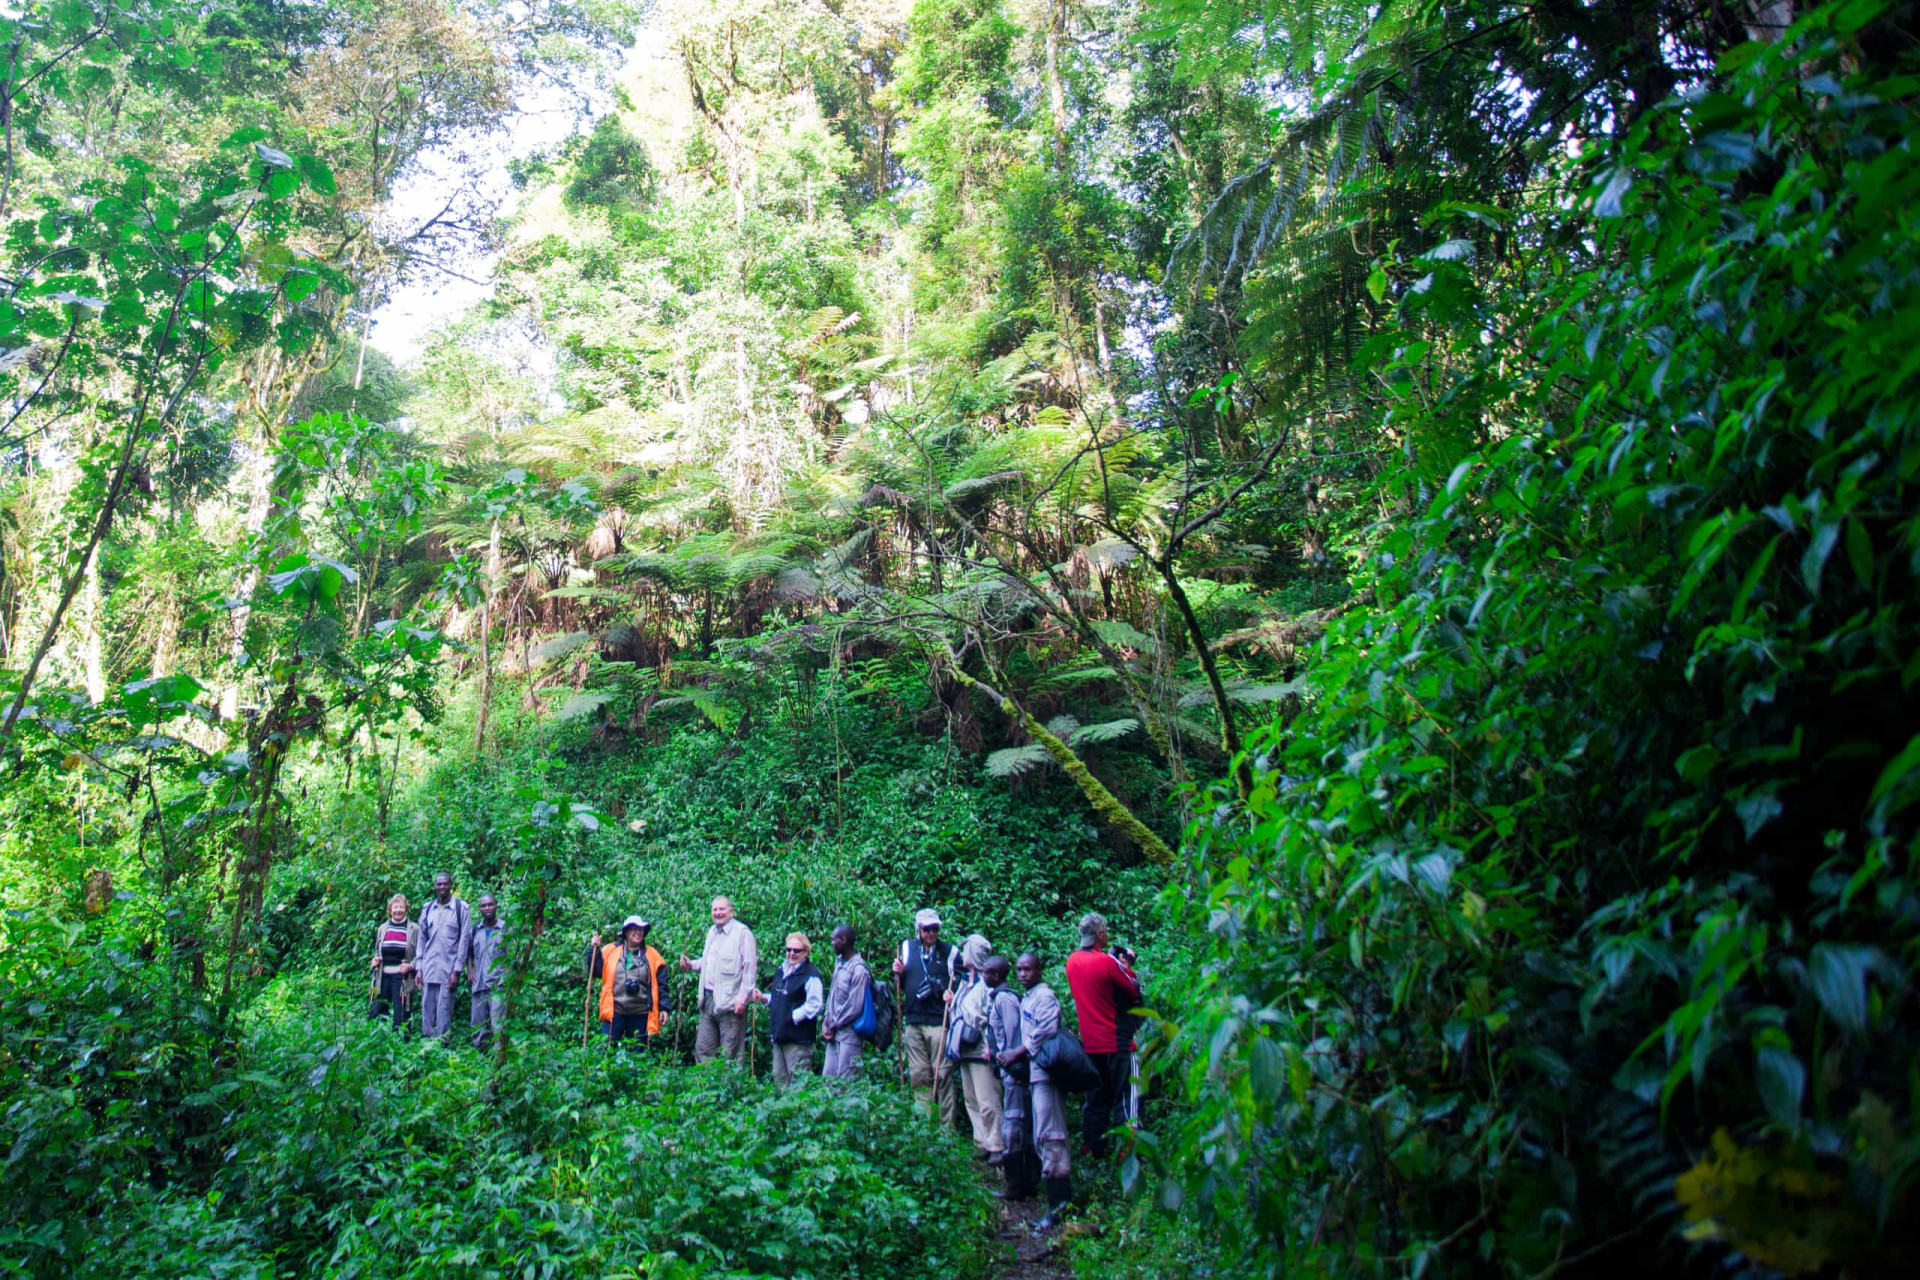 <p>Gorilla trekking in places like Rwanda's Volcanoes National Park often involves going on a long guided hike with professional guides to spend time with mountain gorillas in their natural habitat.</p>